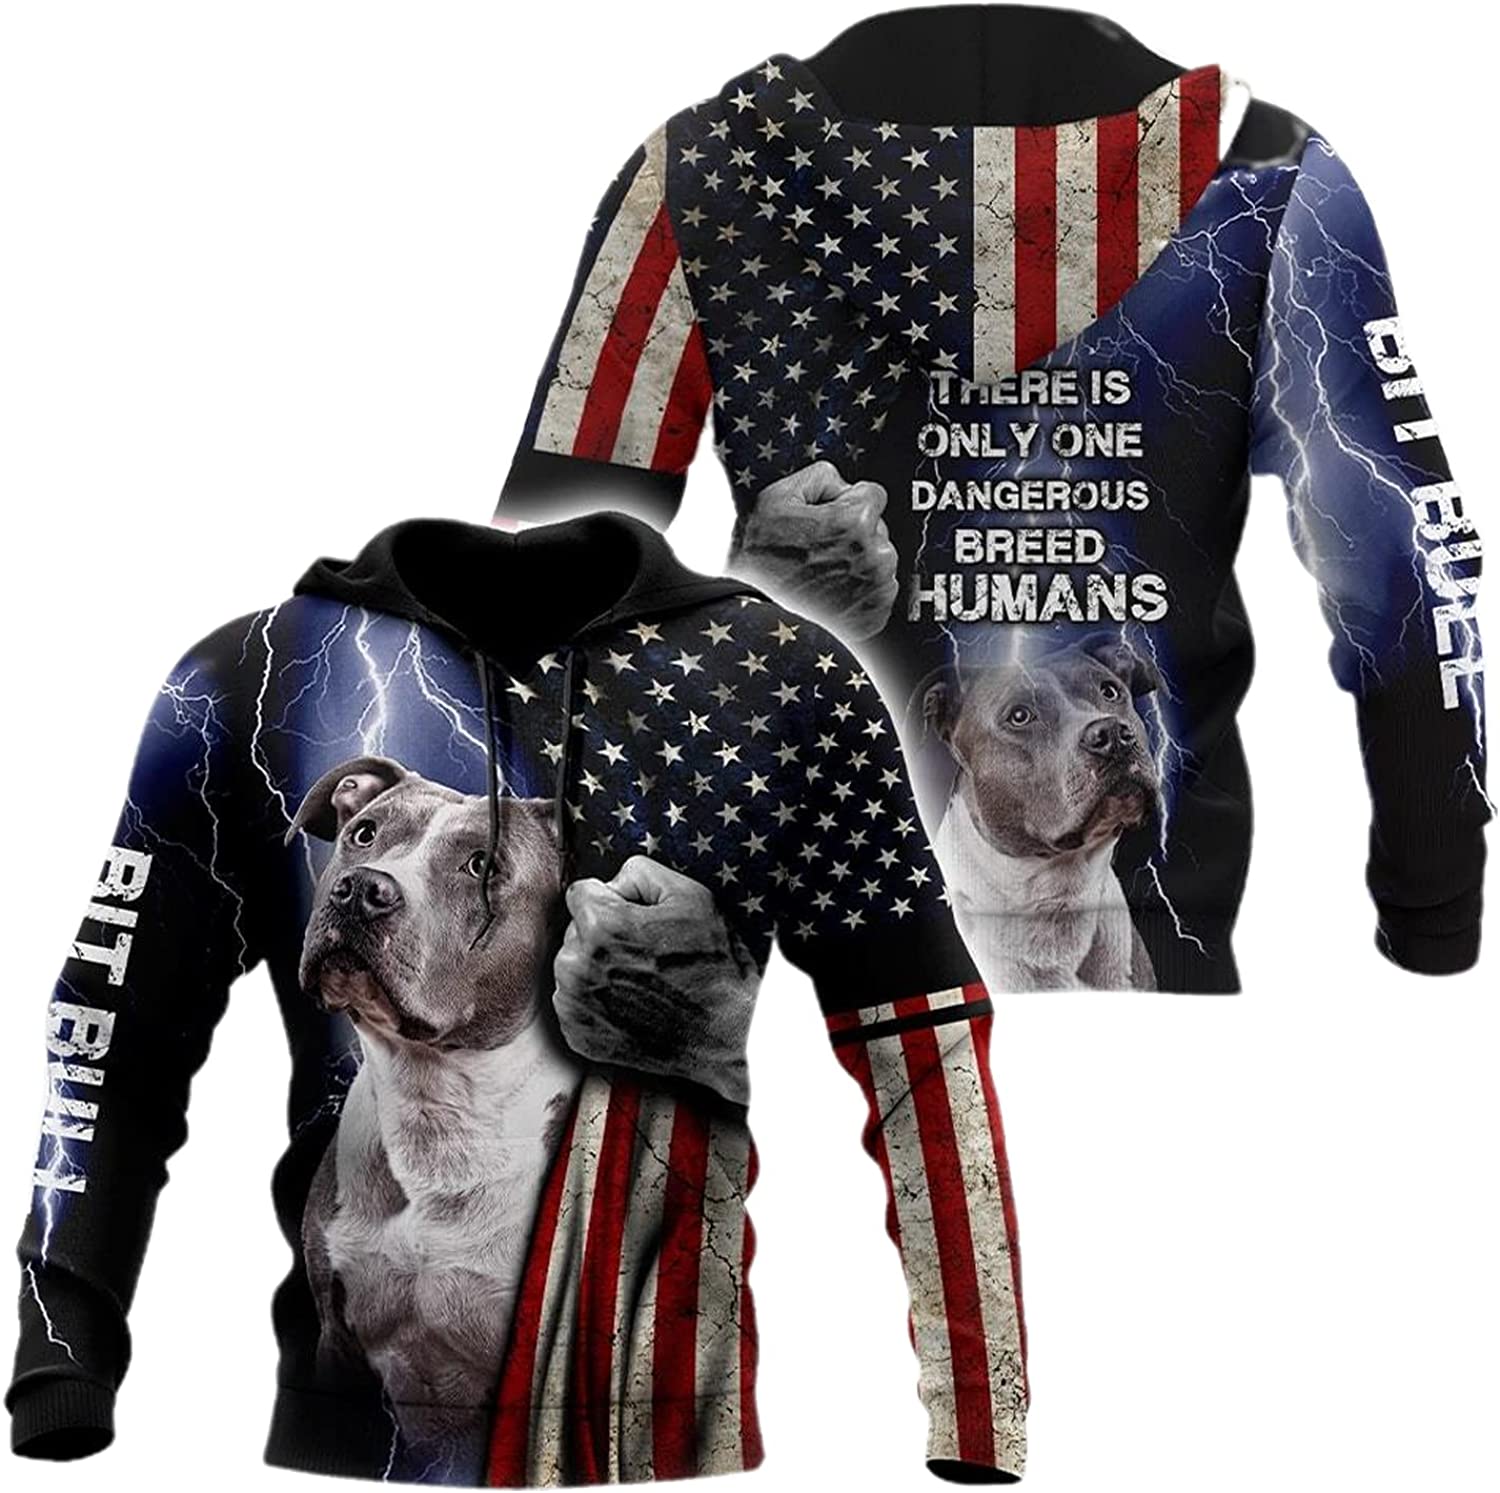 One Dangerous Breed: The Pit Bull – 3D Hoodie All Over Print Shirt for Pit Bull Lovers and Family Gifts – JOT1573